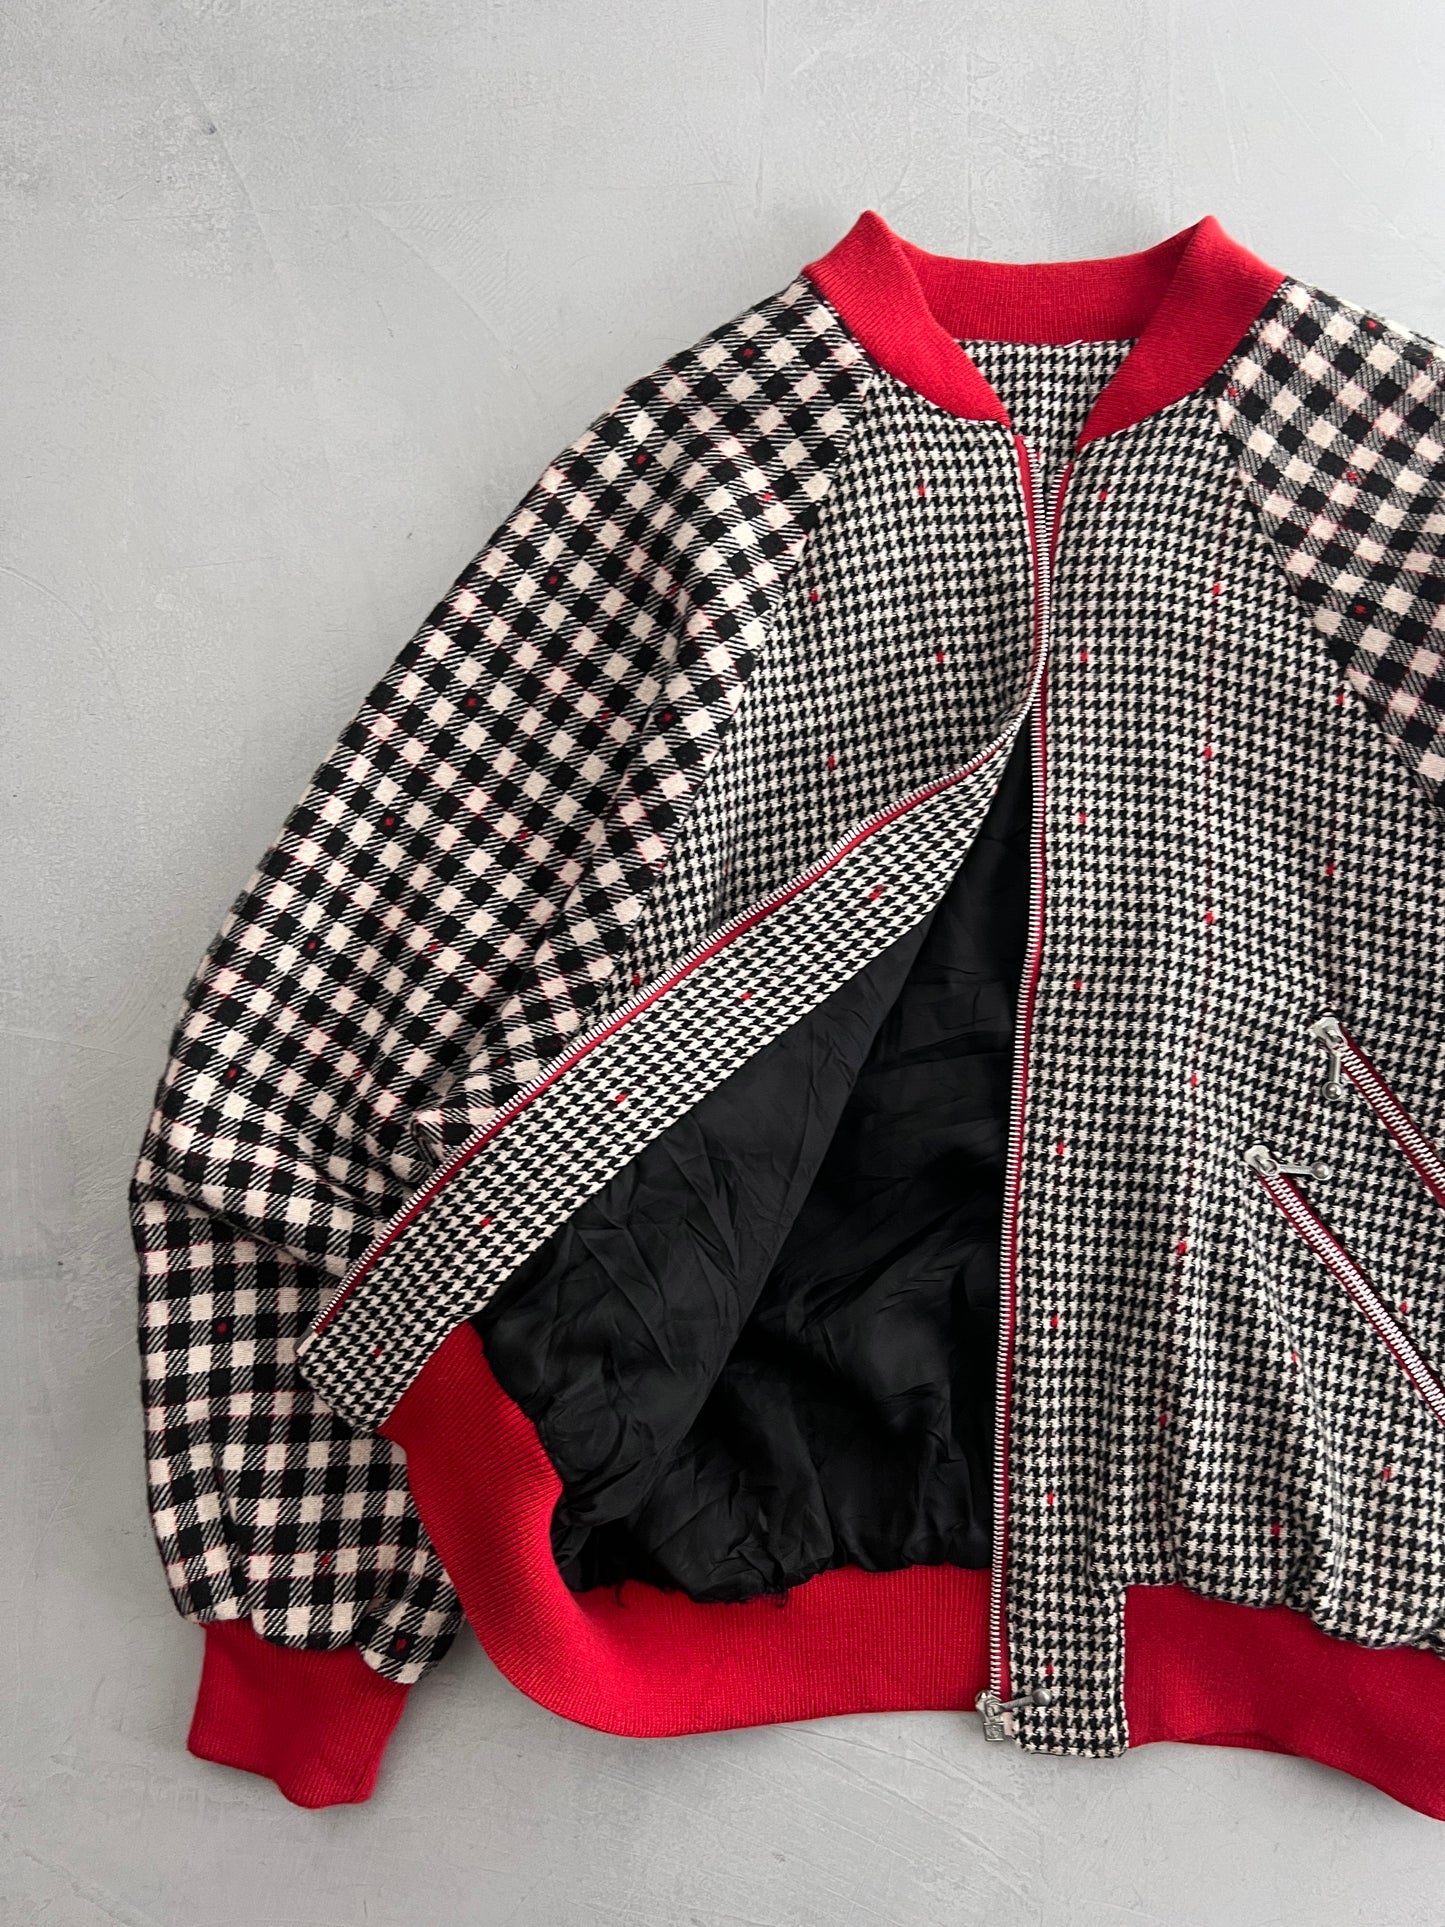 50's/60's Houndstooth Wool Jacket [M]